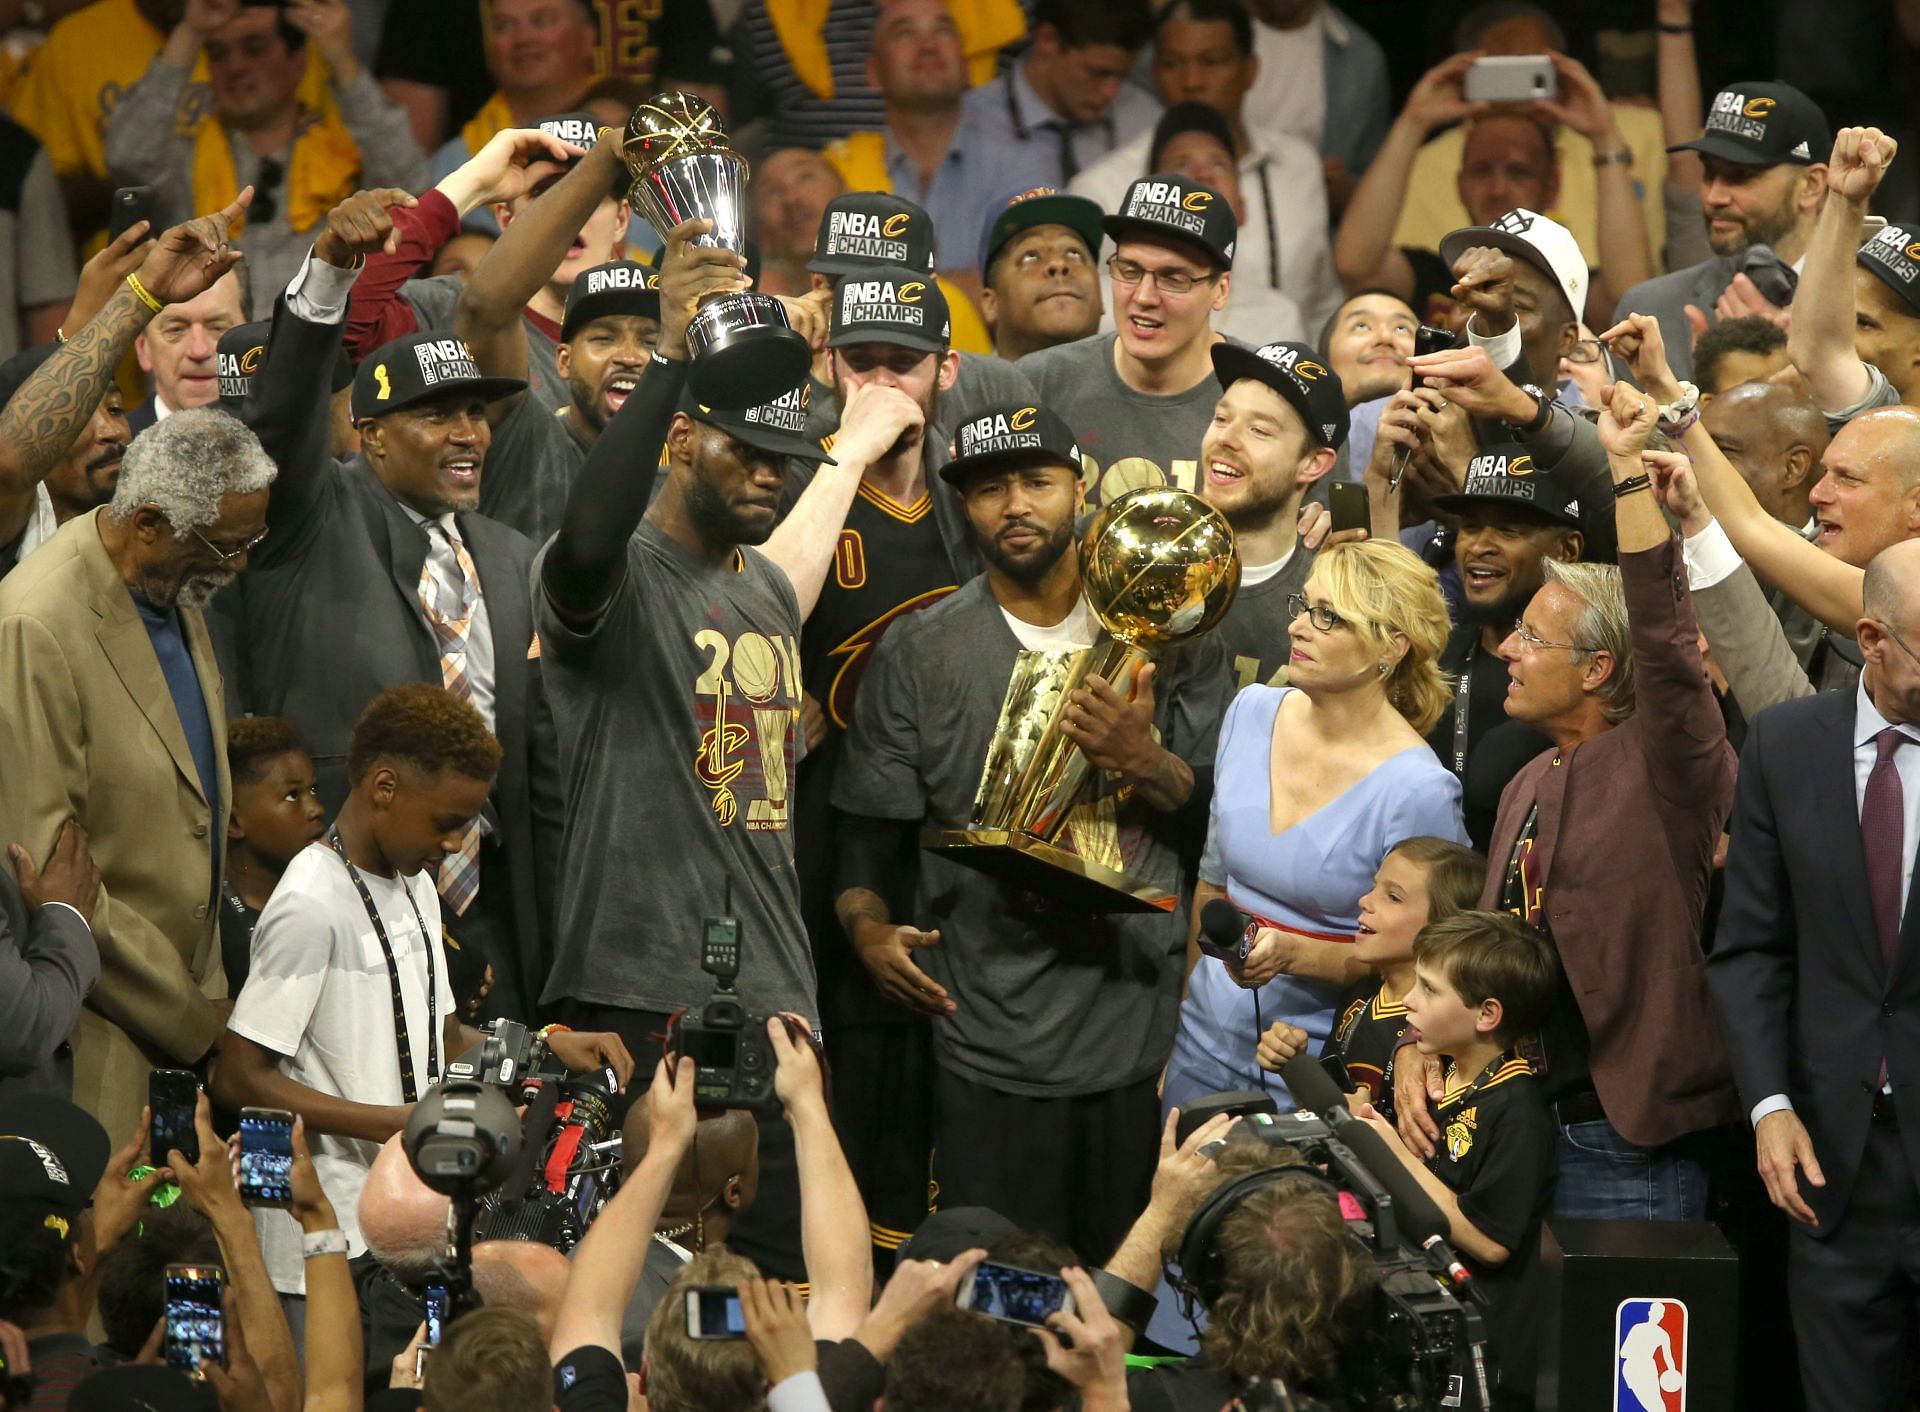 Cleveland celebrated its first championship in more than 50 years after LeBron James led the Cavaliers past a 3-1 deficit against the Golden State Warriors. [Photo: Cleveland.com]